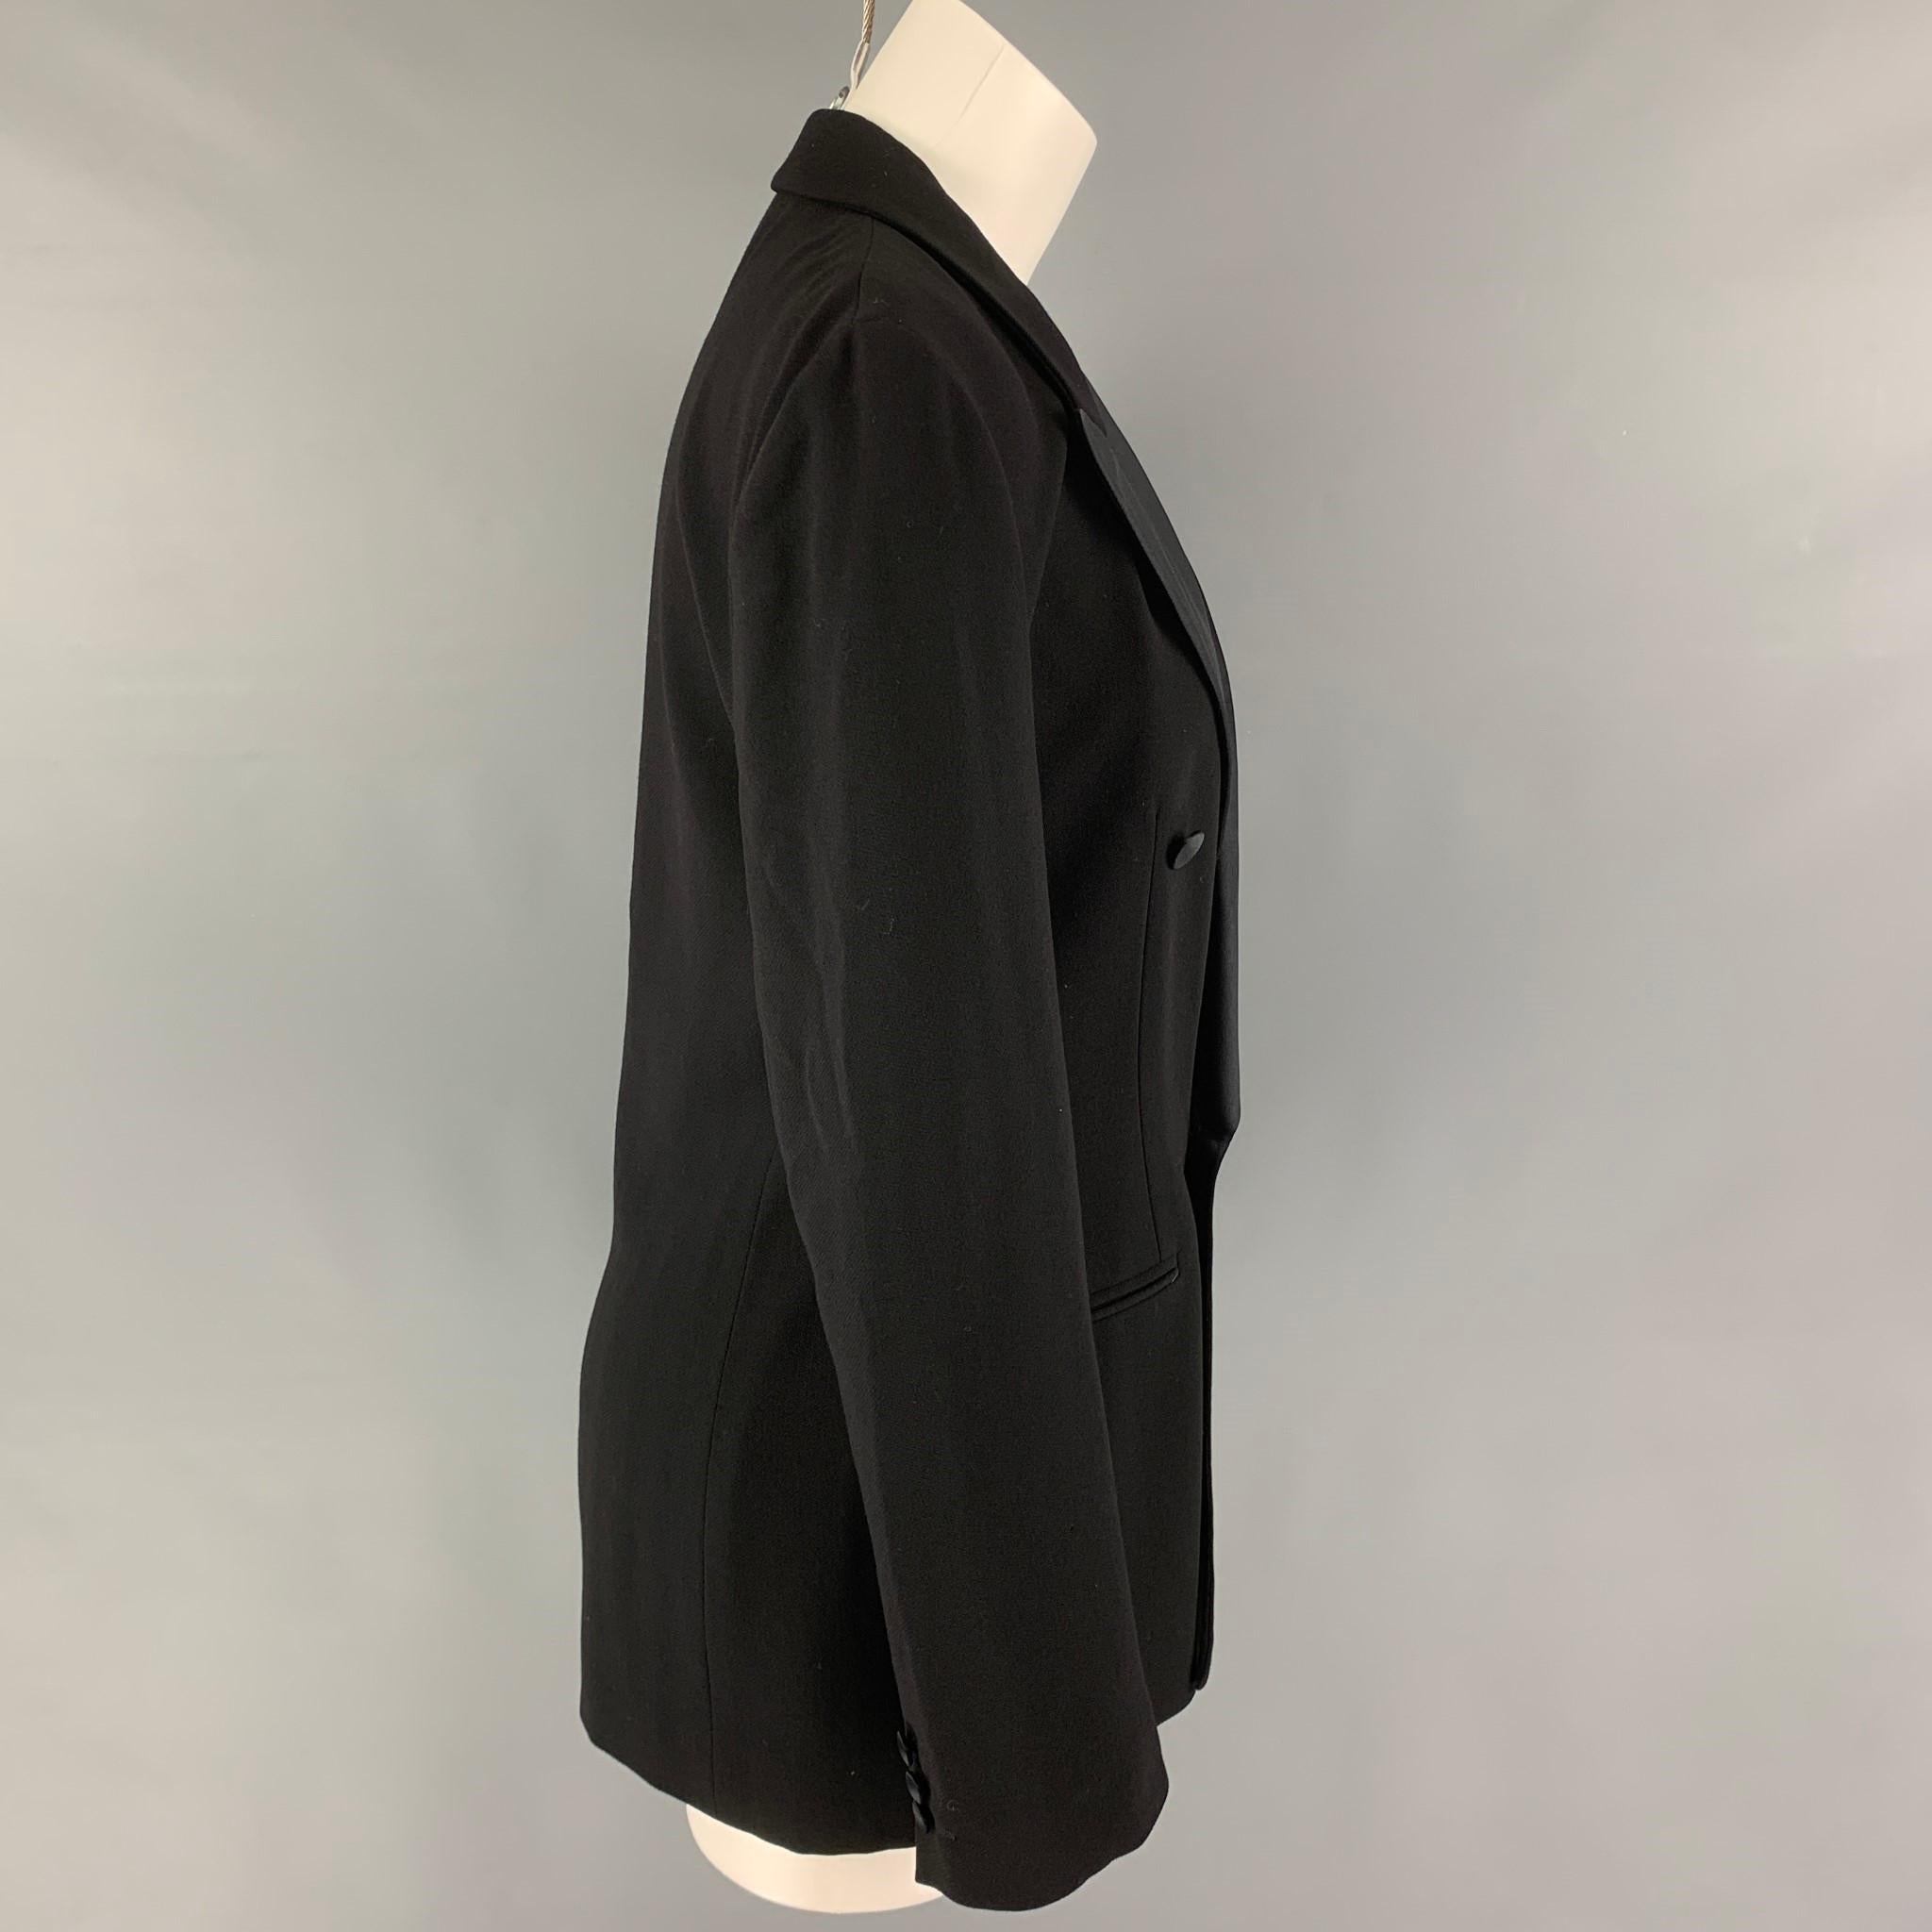 GIORGIO ARMANI jacket comes in a black wool with a full liner featuring a peak lapel, slit pockets, and a double breasted closure. Made in Italy. 

Excellent Pre-Owned Condition.
Marked: 42

Measurements:

Shoulder: 17.5 in.
Bust: 36 in.
Sleeve: 25